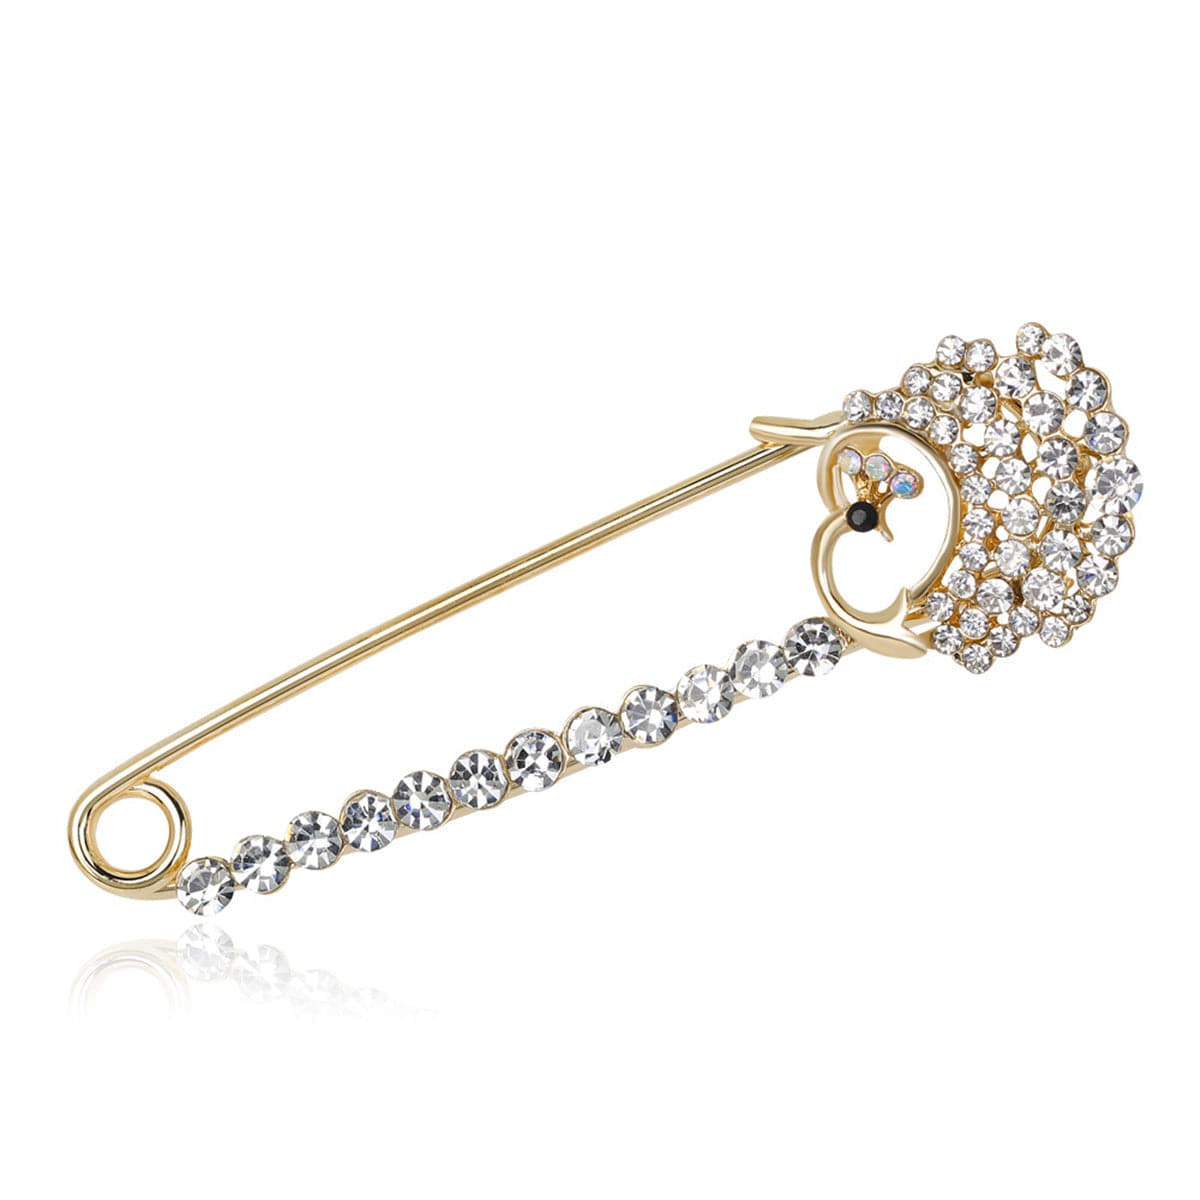 Cubic Zirconia & 18K Gold-Plated Pin Brooch